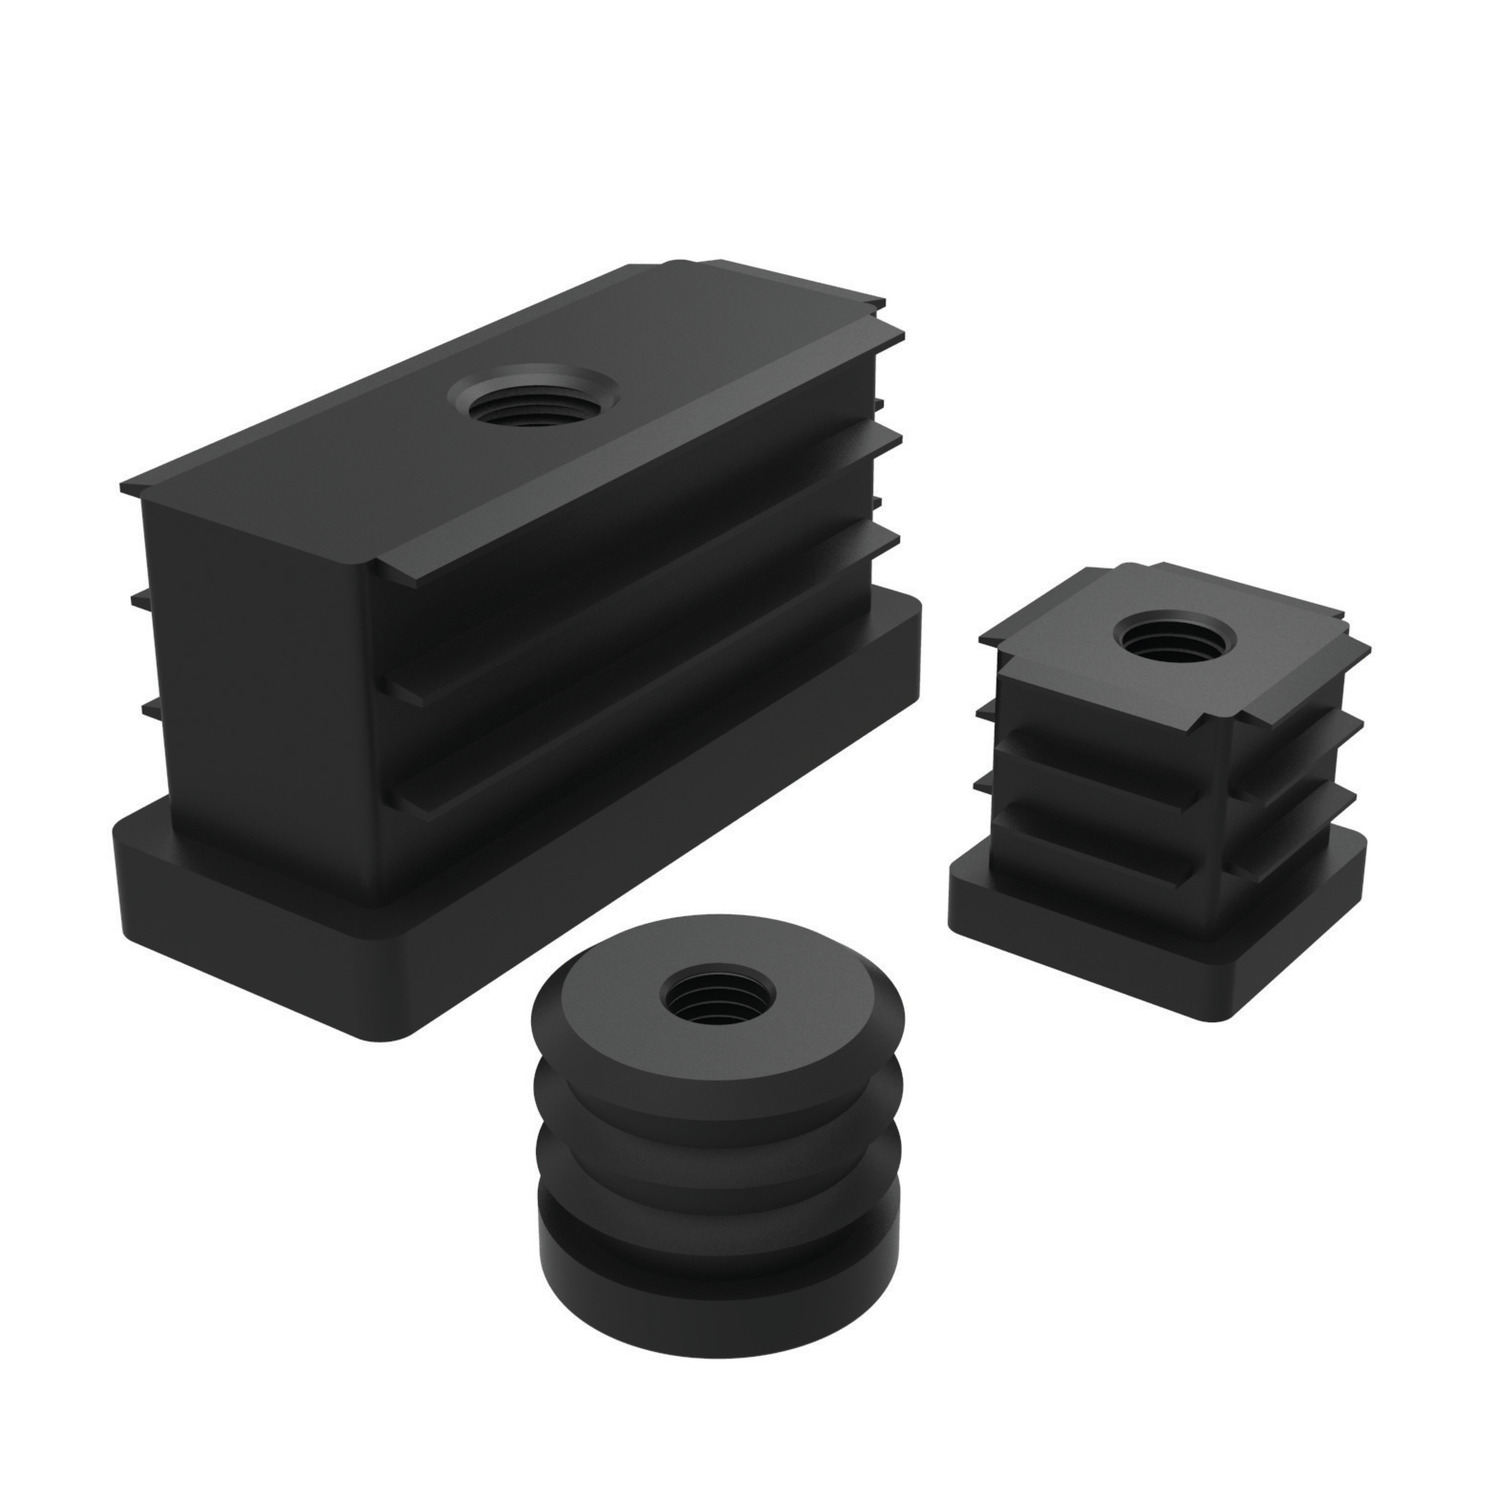 34680.W0250 Thrd. Plastic Inserts for Hollow Section Thermoplastic - Round -  50 - M10